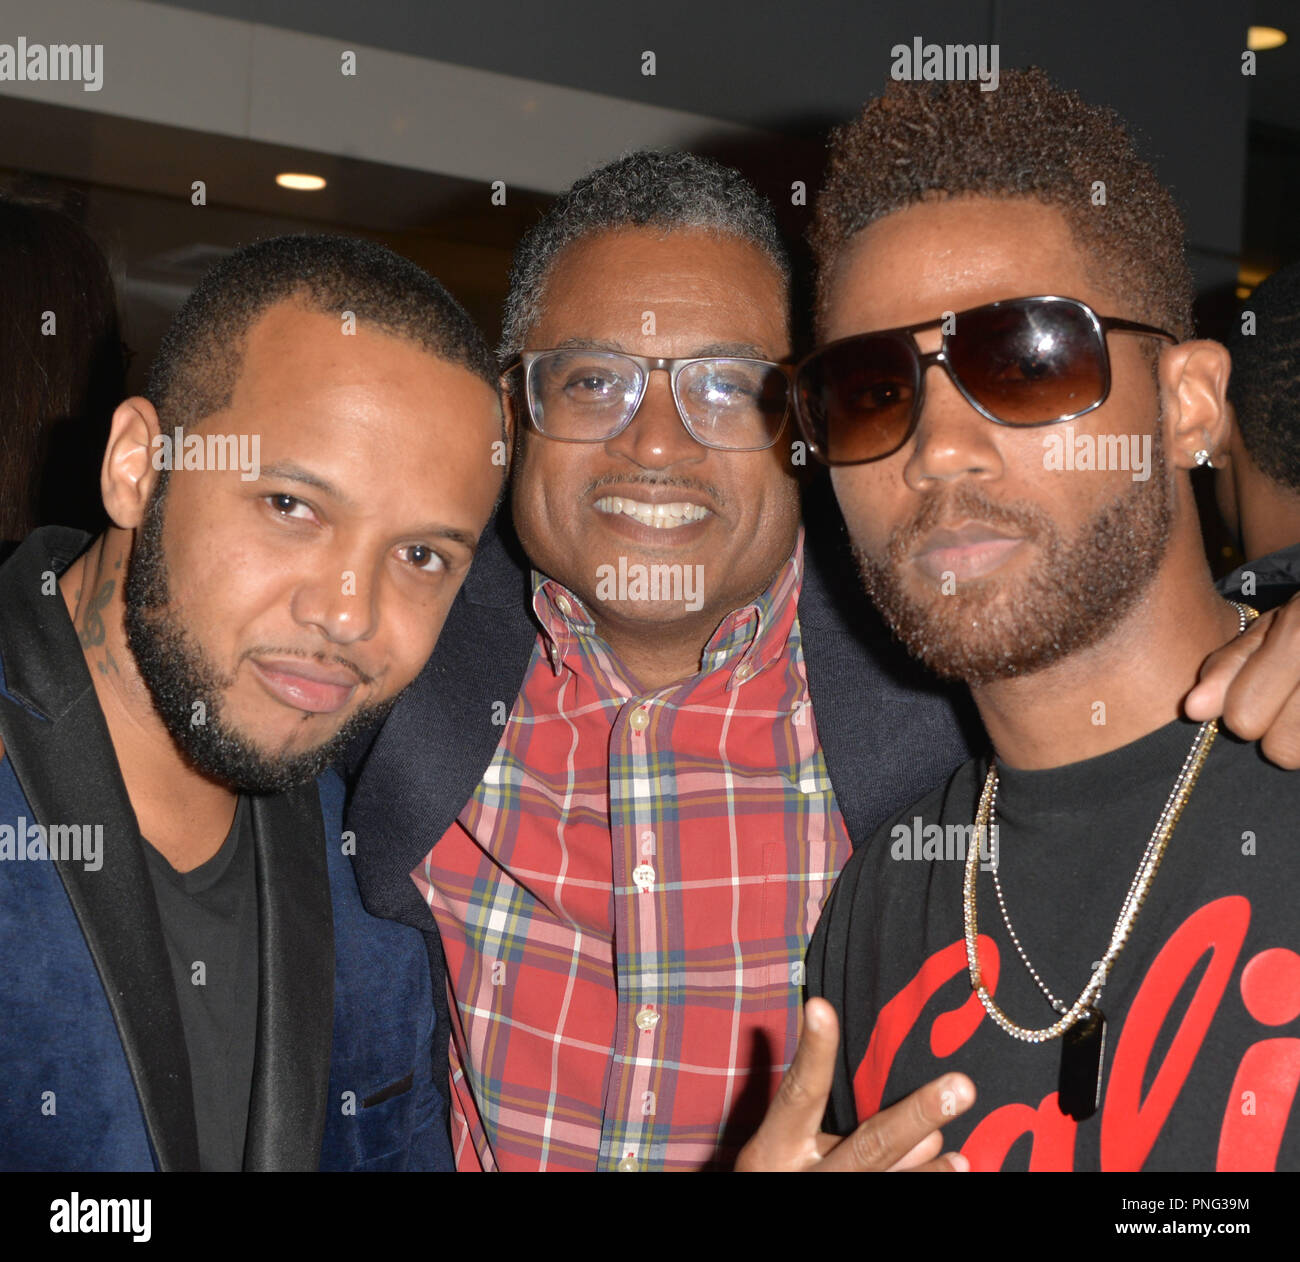 Los Angeles, Ca, USA. 20th Sep, 2018. Jonni Vegaz, Thronell Jones Jr., David Moses at the Jermaine Dupri & So So Def '25 Years of Elevating Culture' exhibit at the Grammy Museum in Los Angeles, California on September 20, 2018. Credit: Koi Sojer/Snap'n U Photos/Media Punch/Alamy Live News Stock Photo